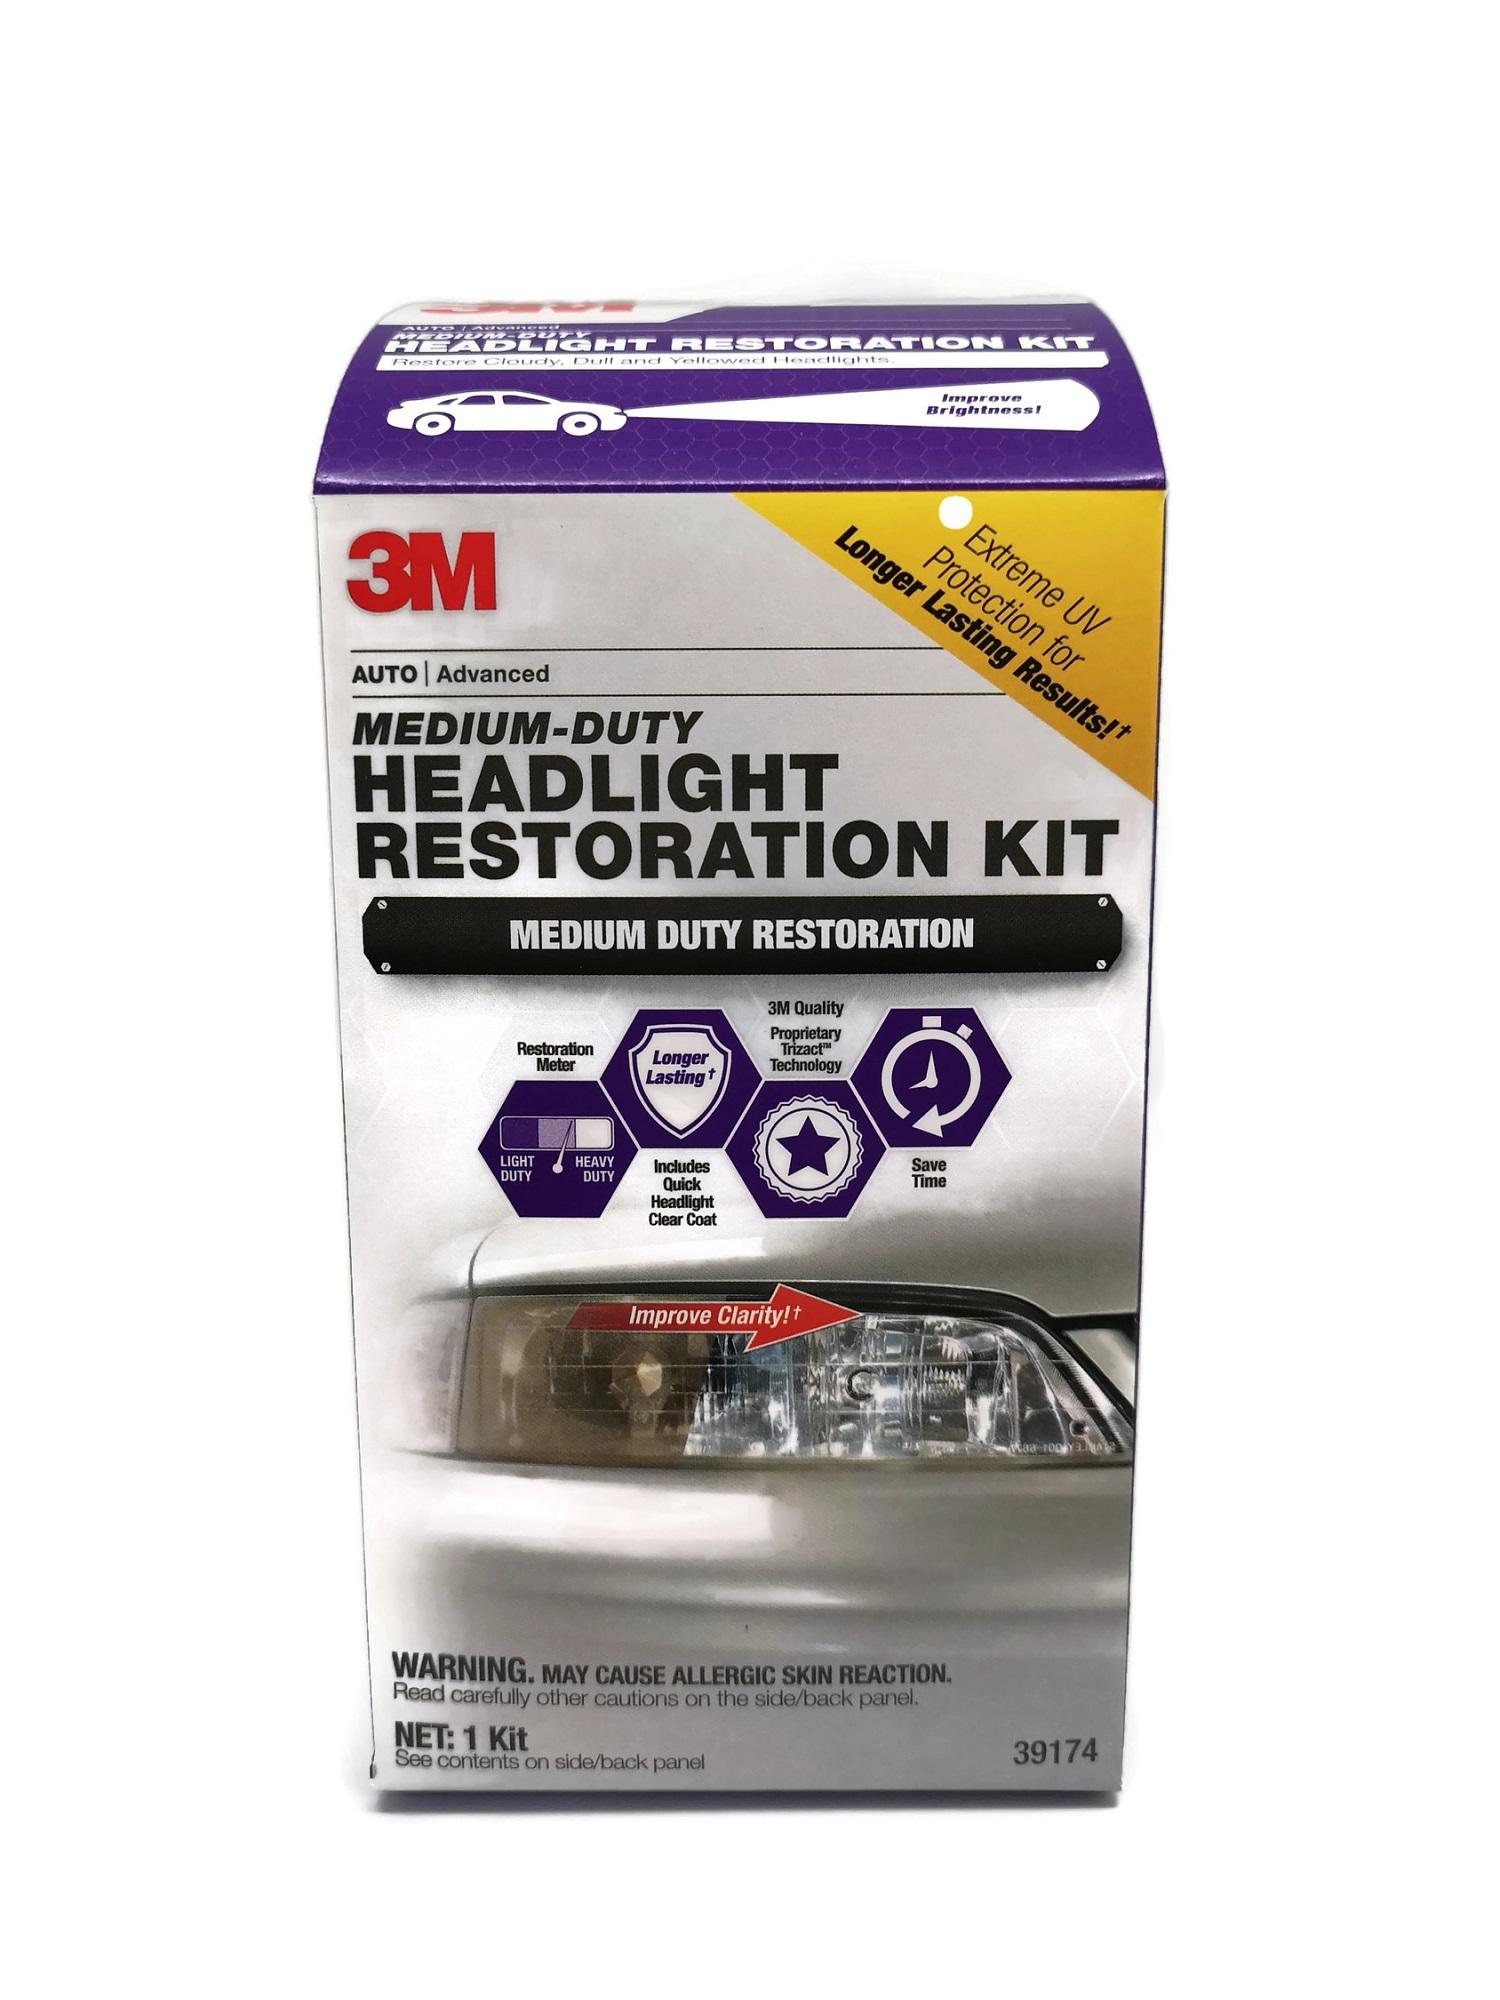 3M Quick and Easy Headlight Restoration Kit, Removes Light Yellowing in  15-Minutes, 39193, 1 Kit